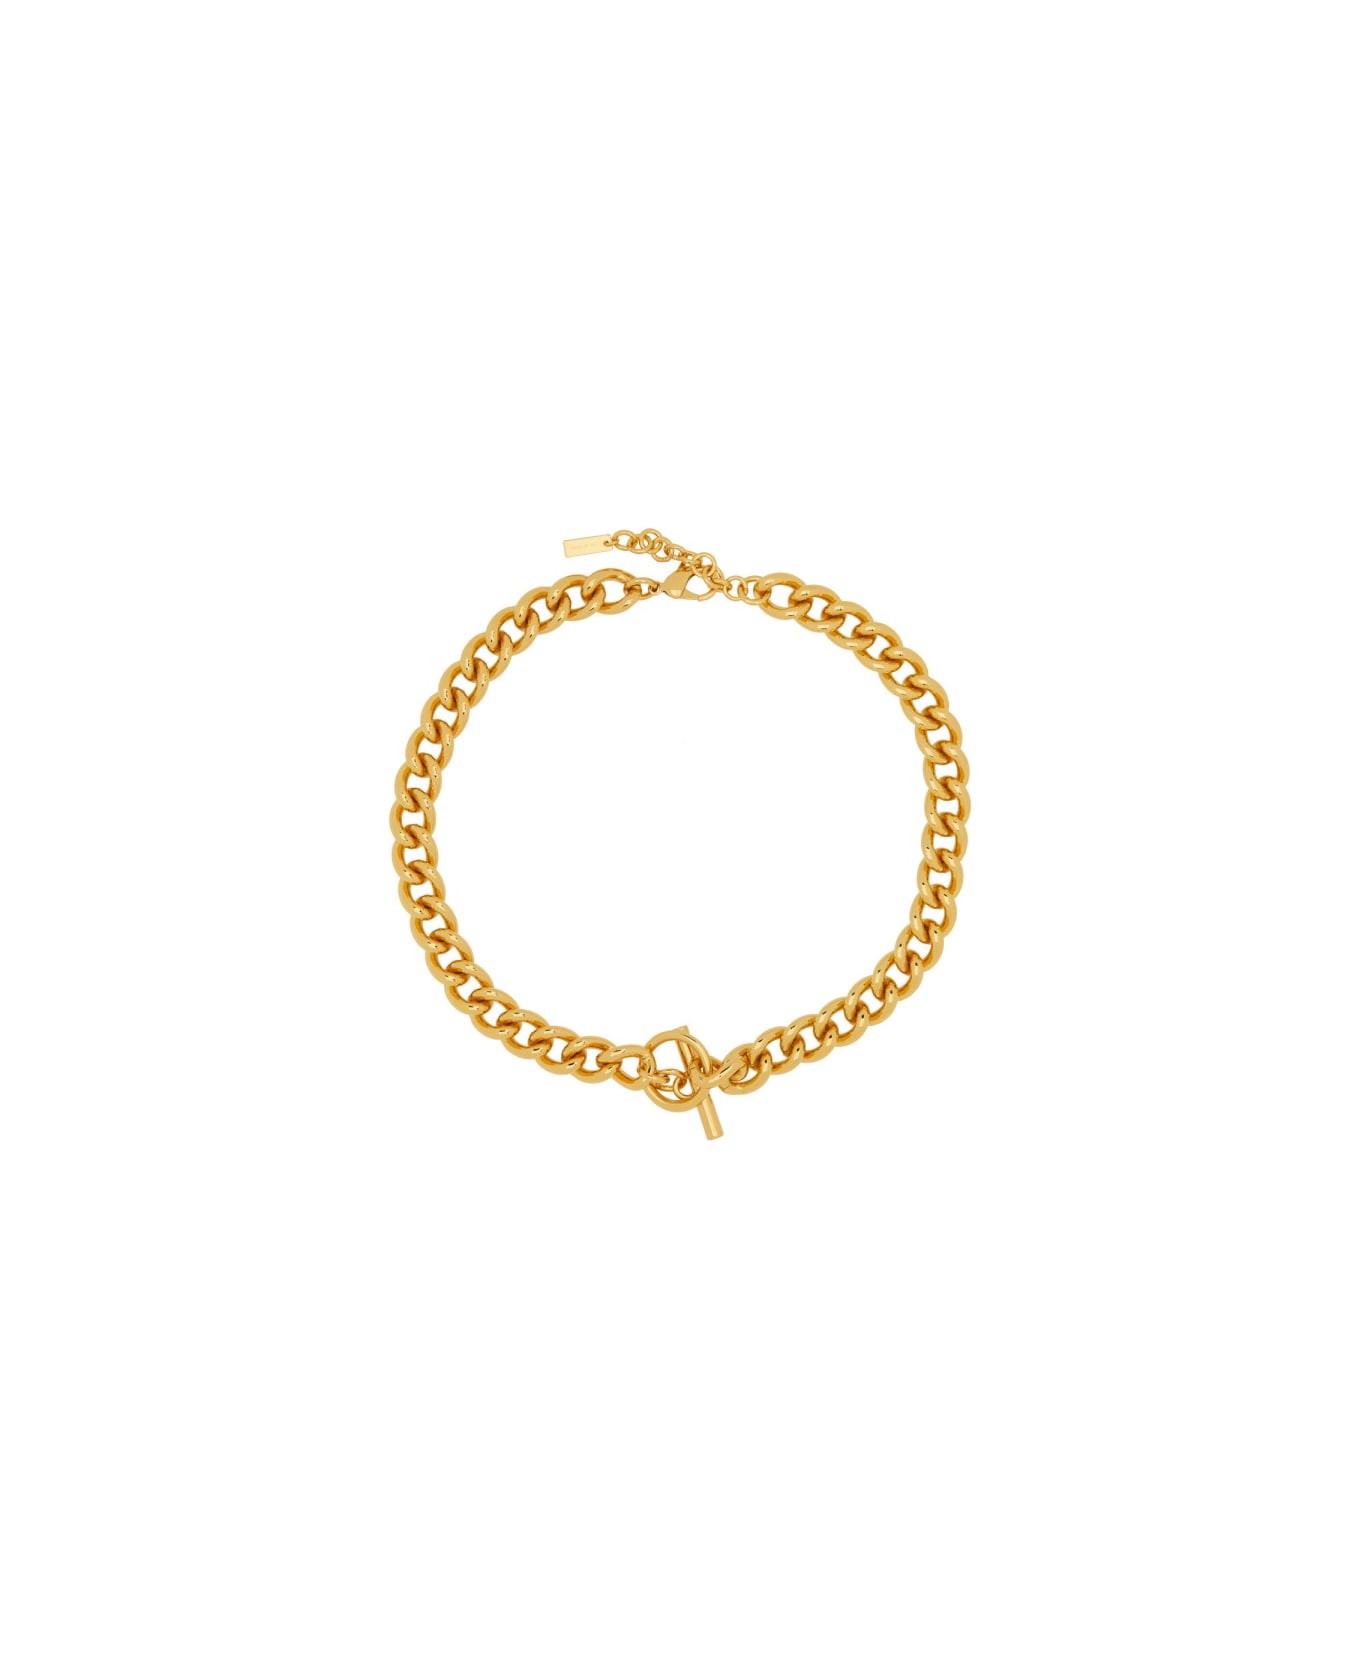 Moschino Logo Necklace - GOLD ネックレス